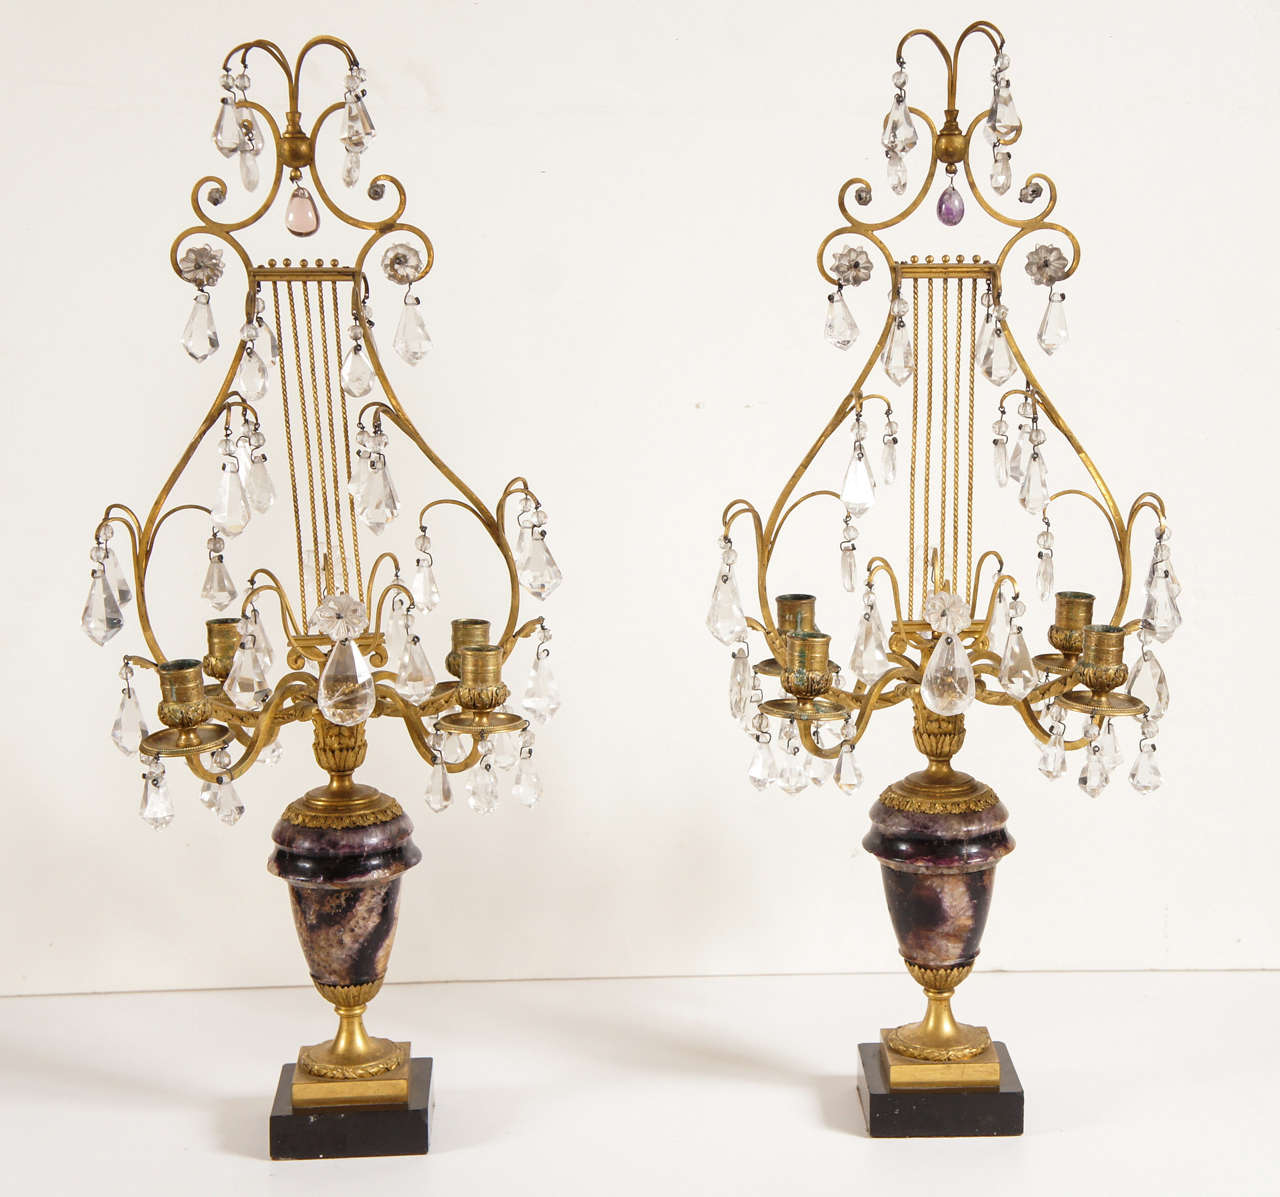 This fine pair of four-light candelabra are English and made circa 1820. In the manner and style of the great English sliver and bronze craftsman Matthew Boulton, they are made from the finest materials to and to exacting standards. The  Urn shaped